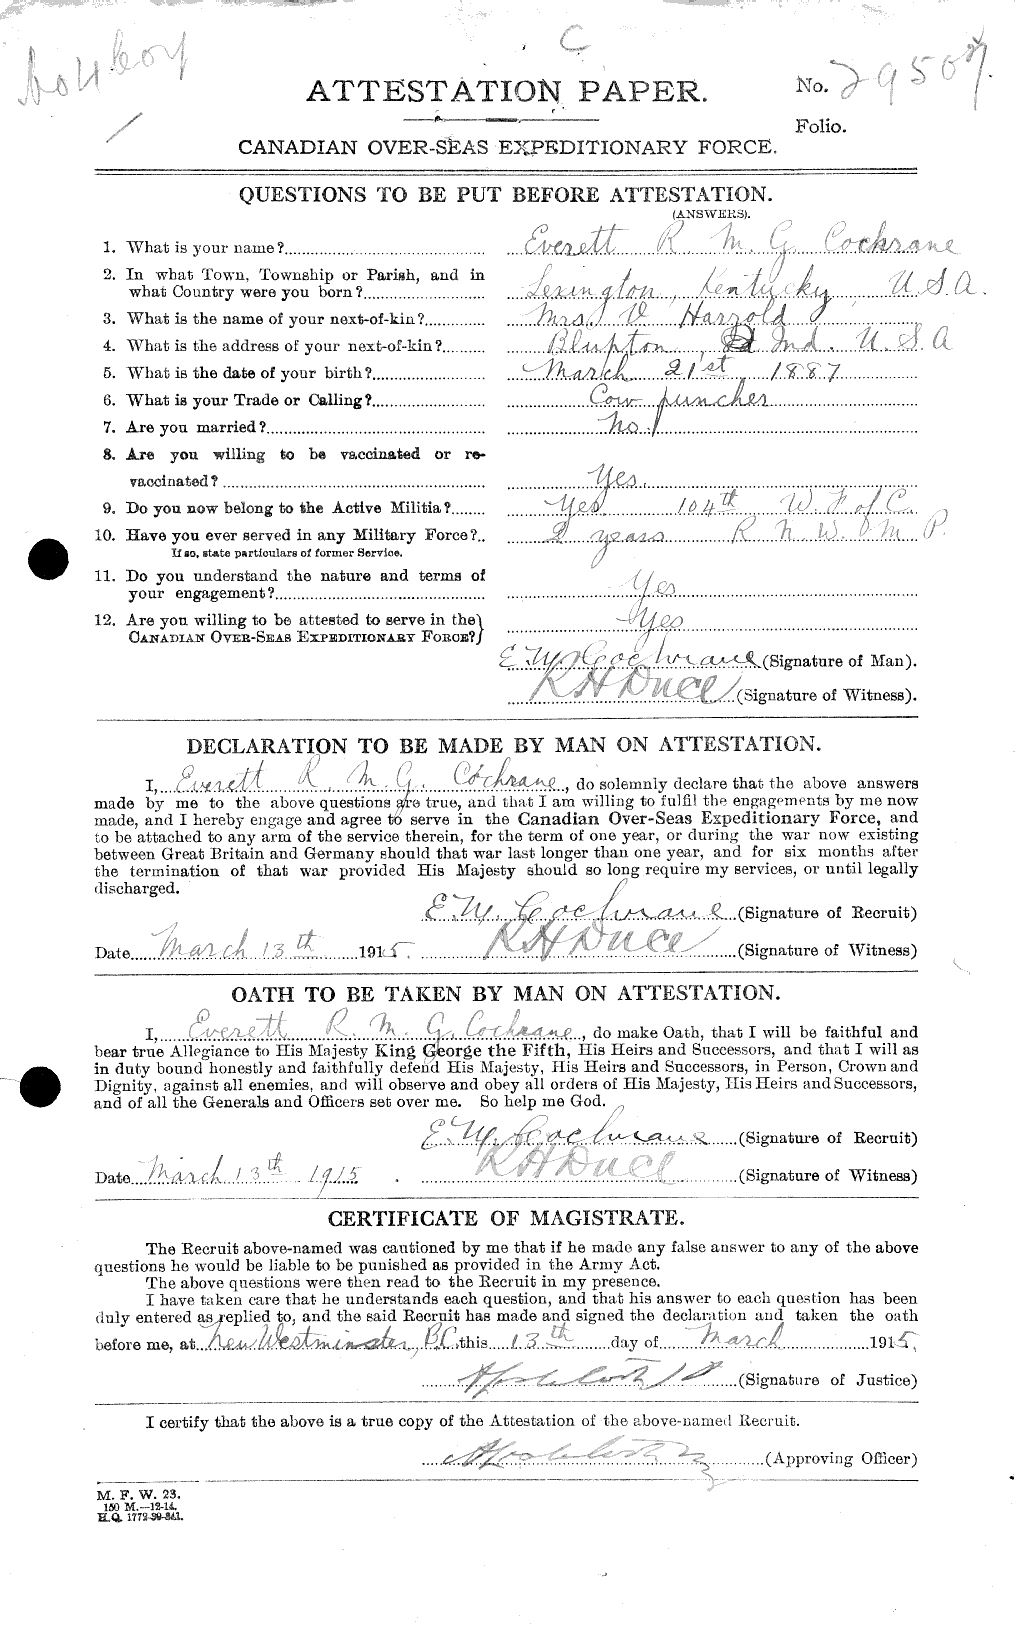 Personnel Records of the First World War - CEF 026340a